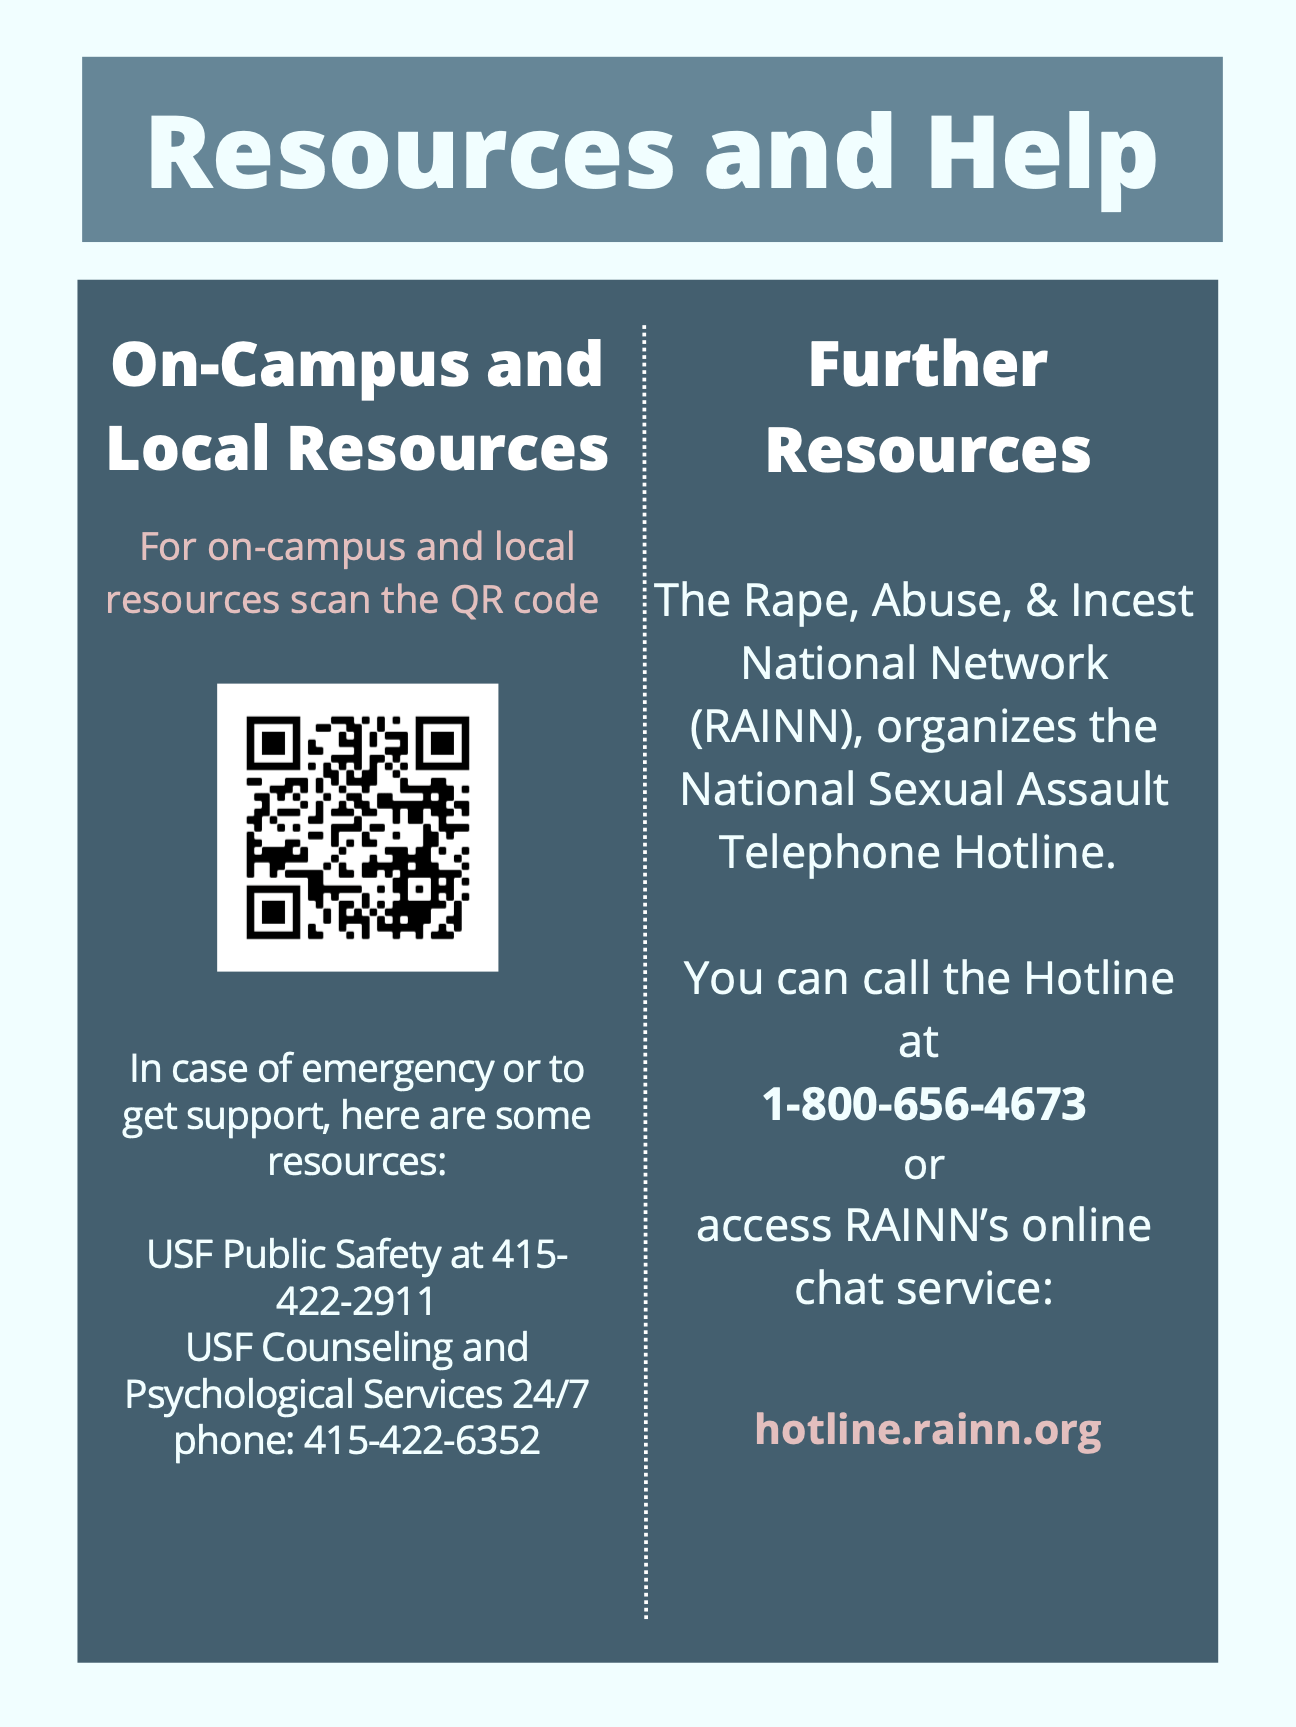 A picture of a flyer that states on campus, local resources, and further resources.